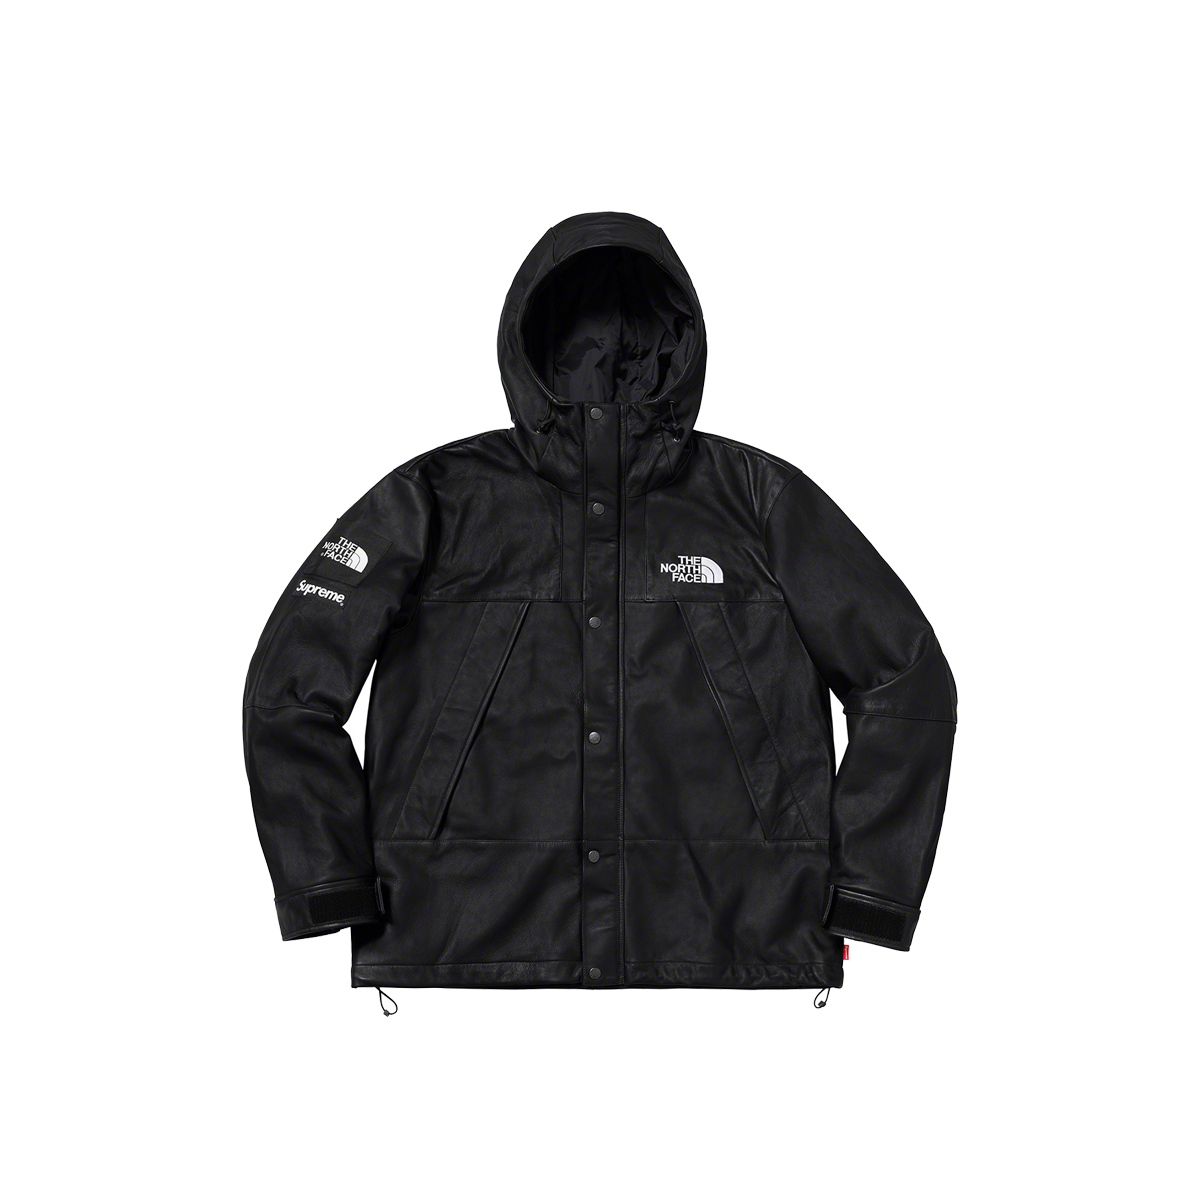 Supreme x The North Face Leather Mountain Parka Jacket Black (FW18